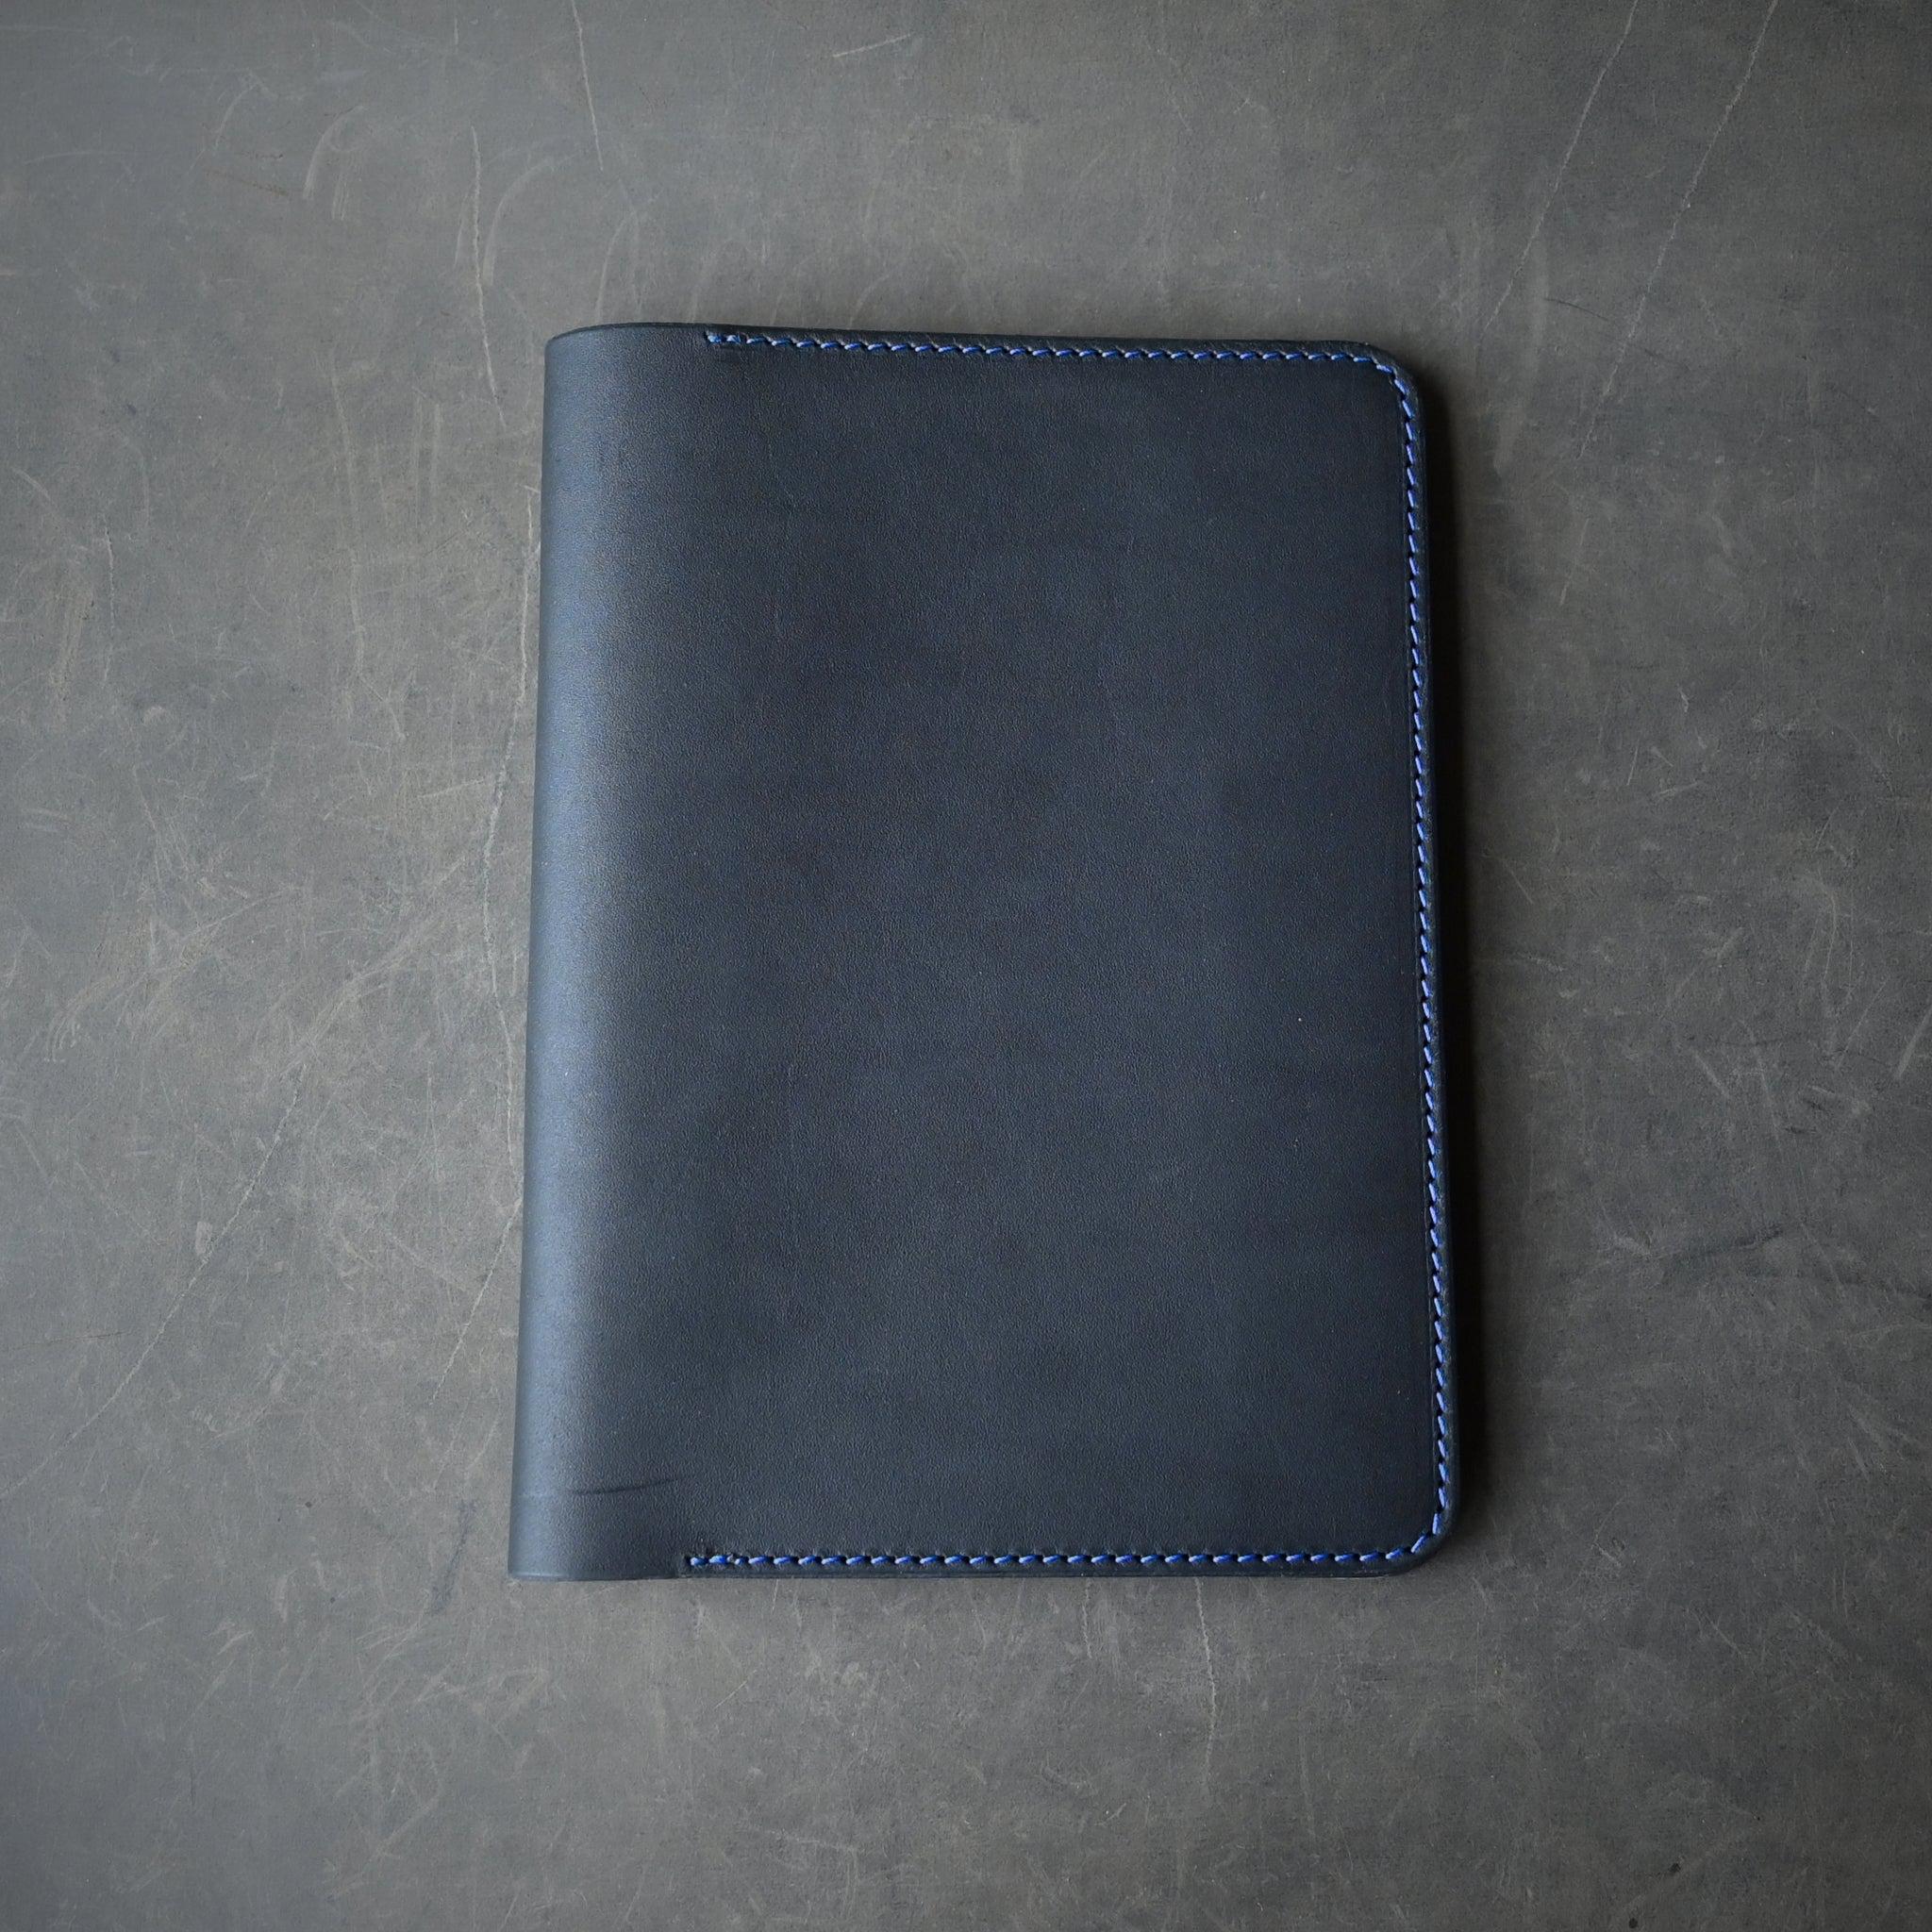 Ready To Ship A5 Leather Notebook Cover Black w/ Blue Thread